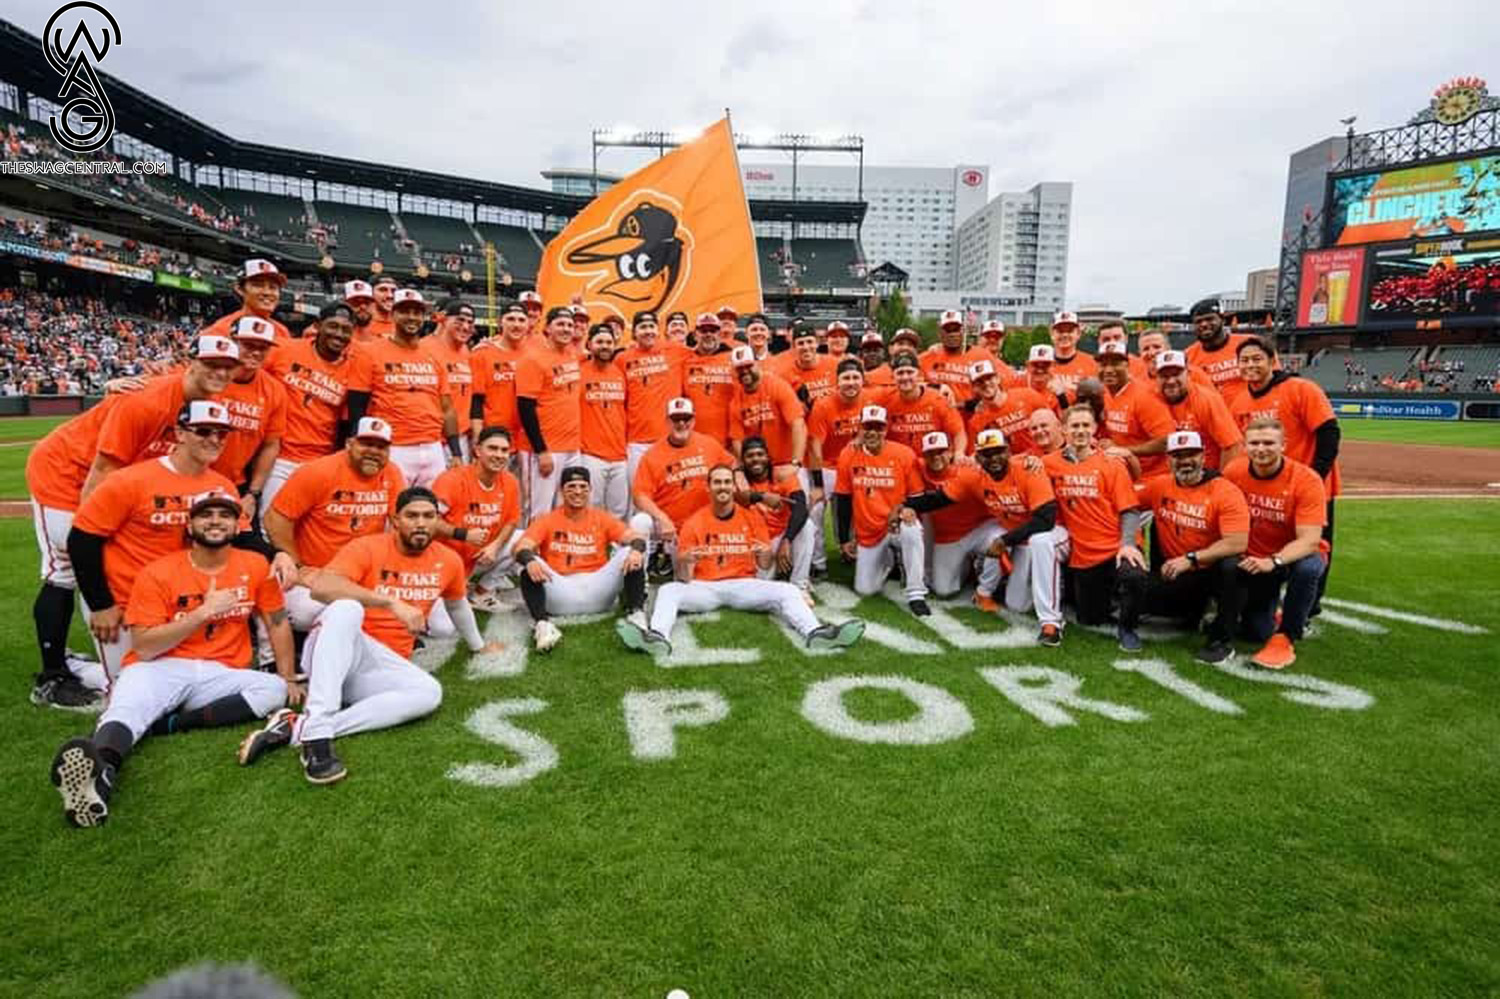 Baltimore Orioles Take October PlayoffsBound as AL East Champions in